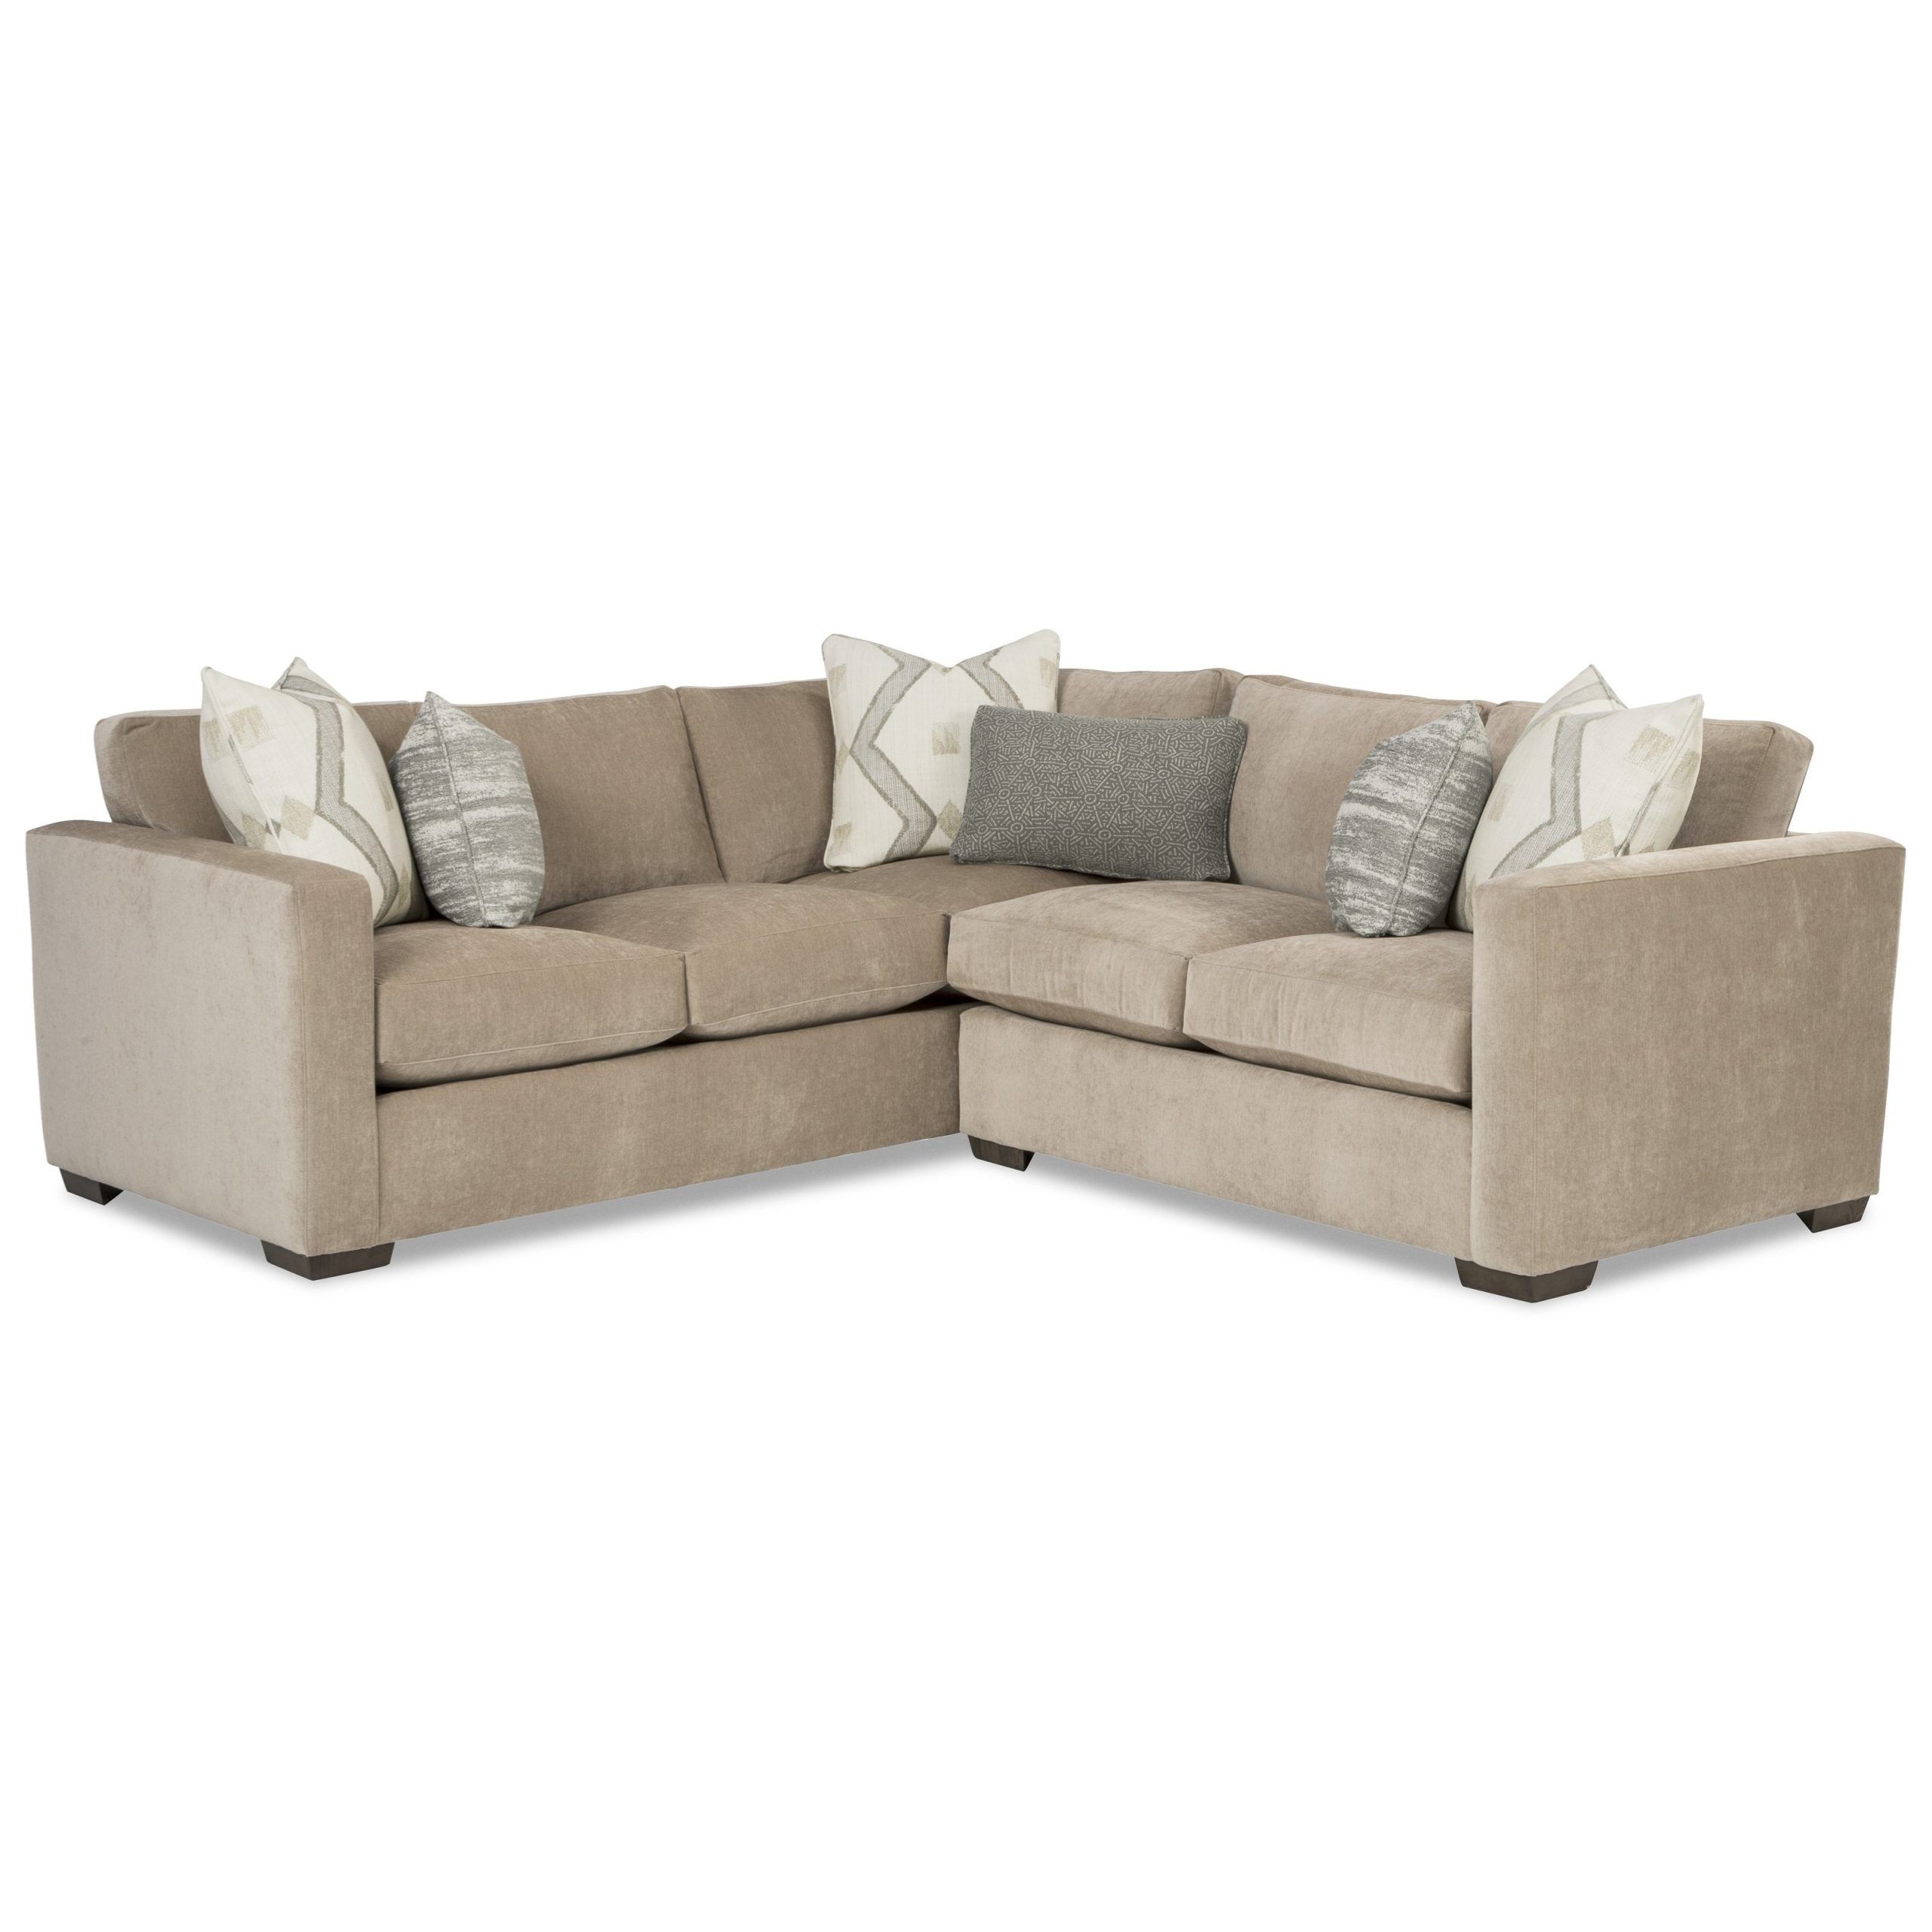 Best And Newest Craftmaster 792750bd Contemporary 2 Piece Sectional With Raf Corner Regarding Microfiber Sectional Corner Sofas (View 13 of 15)